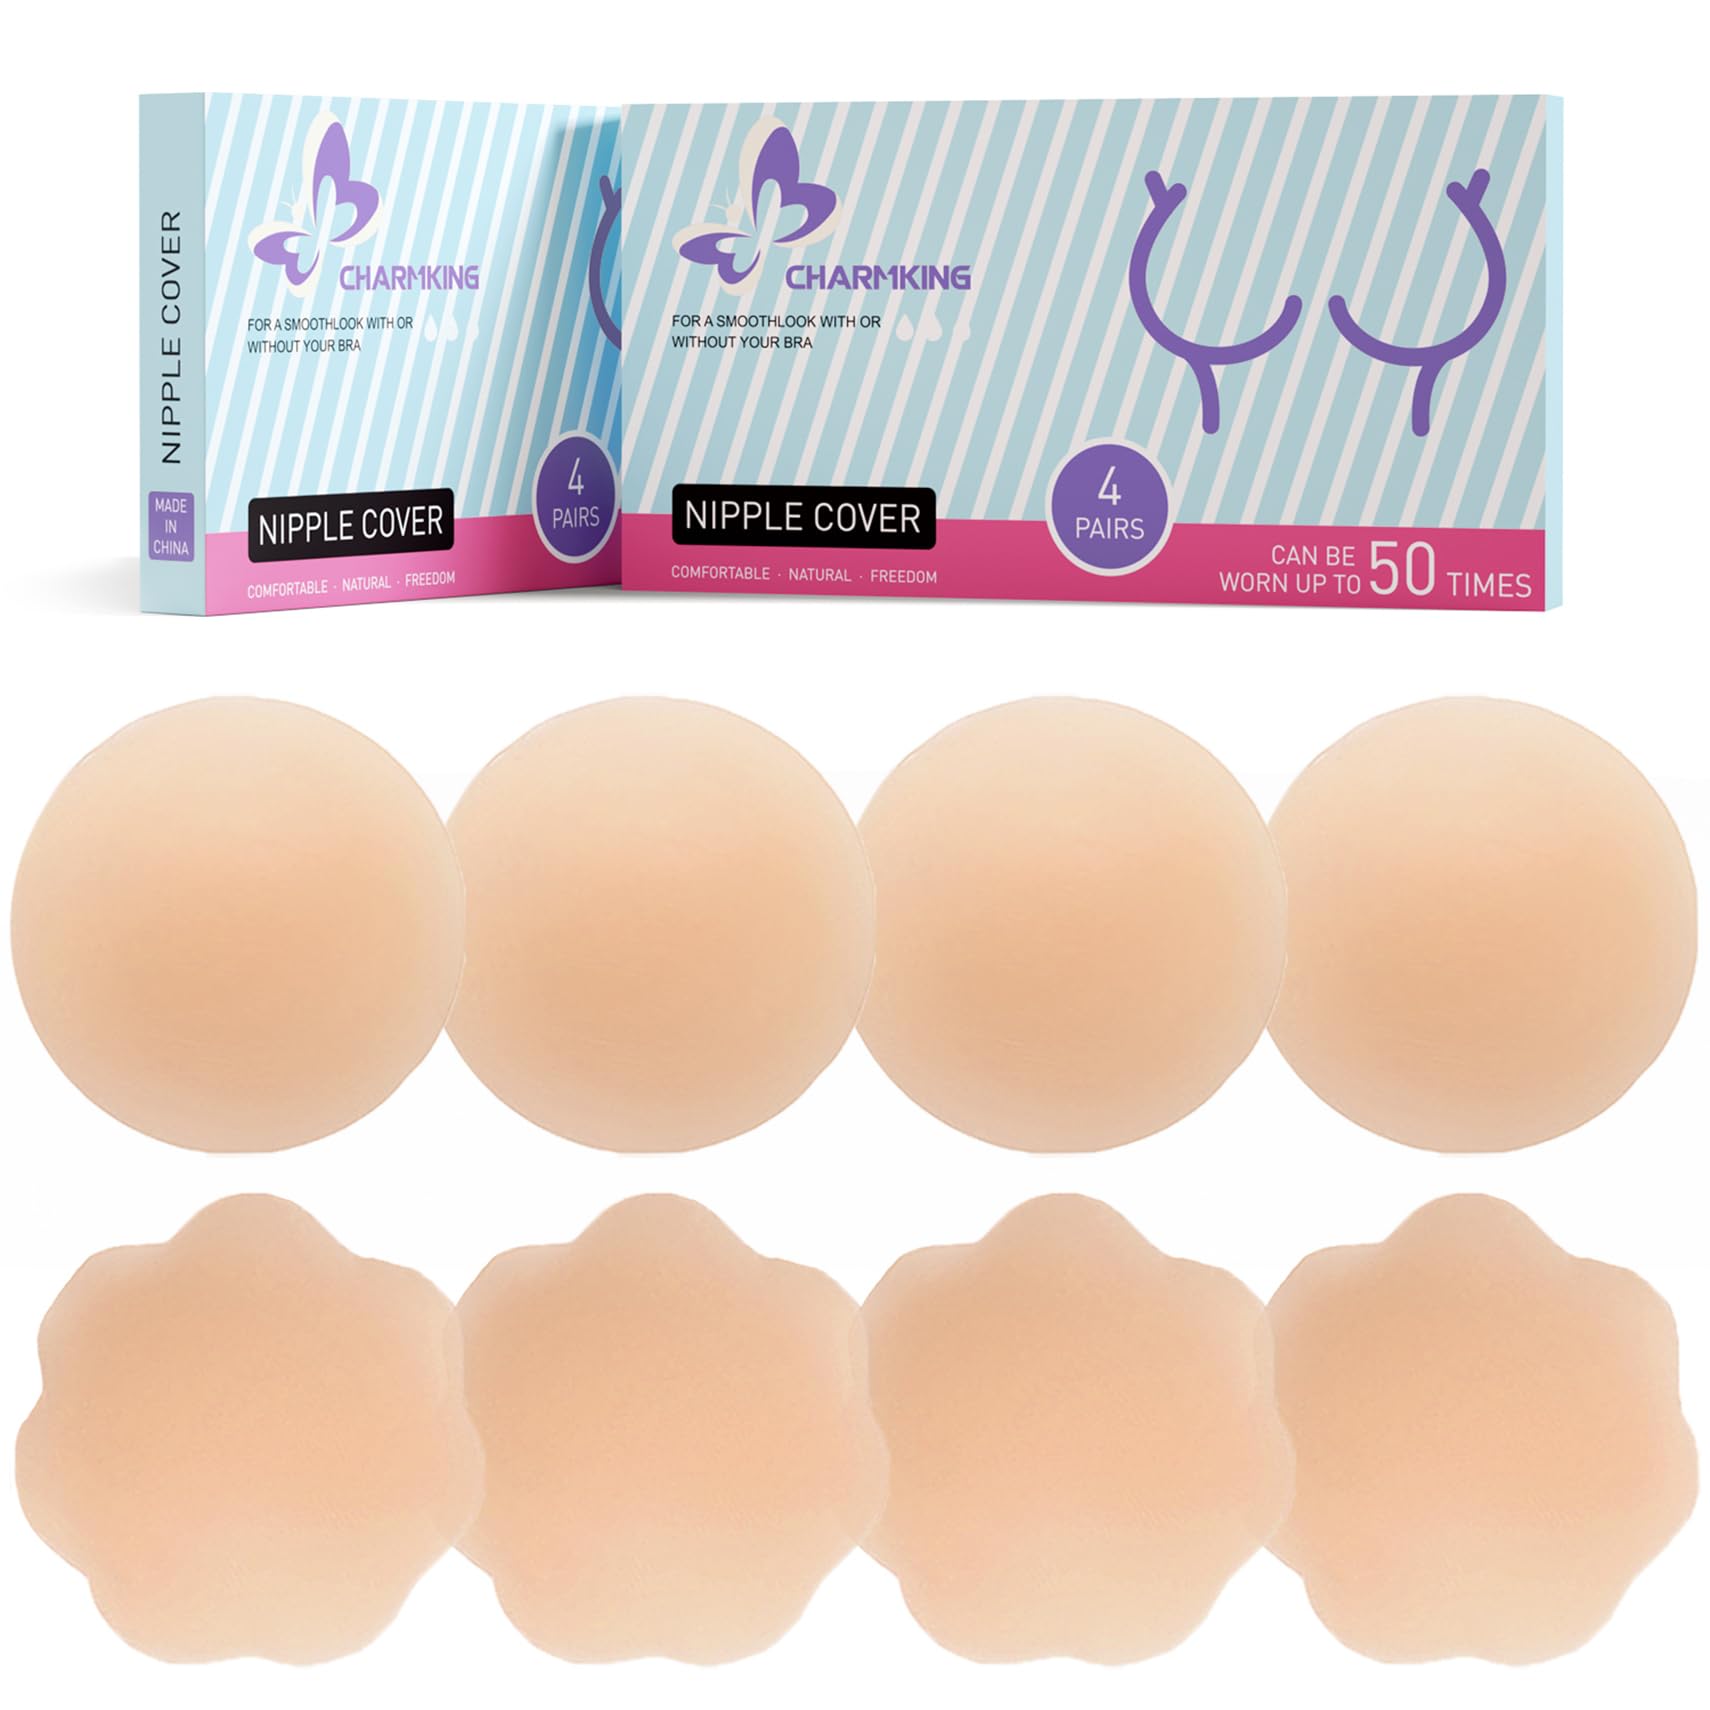 CHARMKING Nipple Covers 4 Pairs for Women, Reusable Adhesive Nipple Coverings, Invisible Pasties Silicone Cover